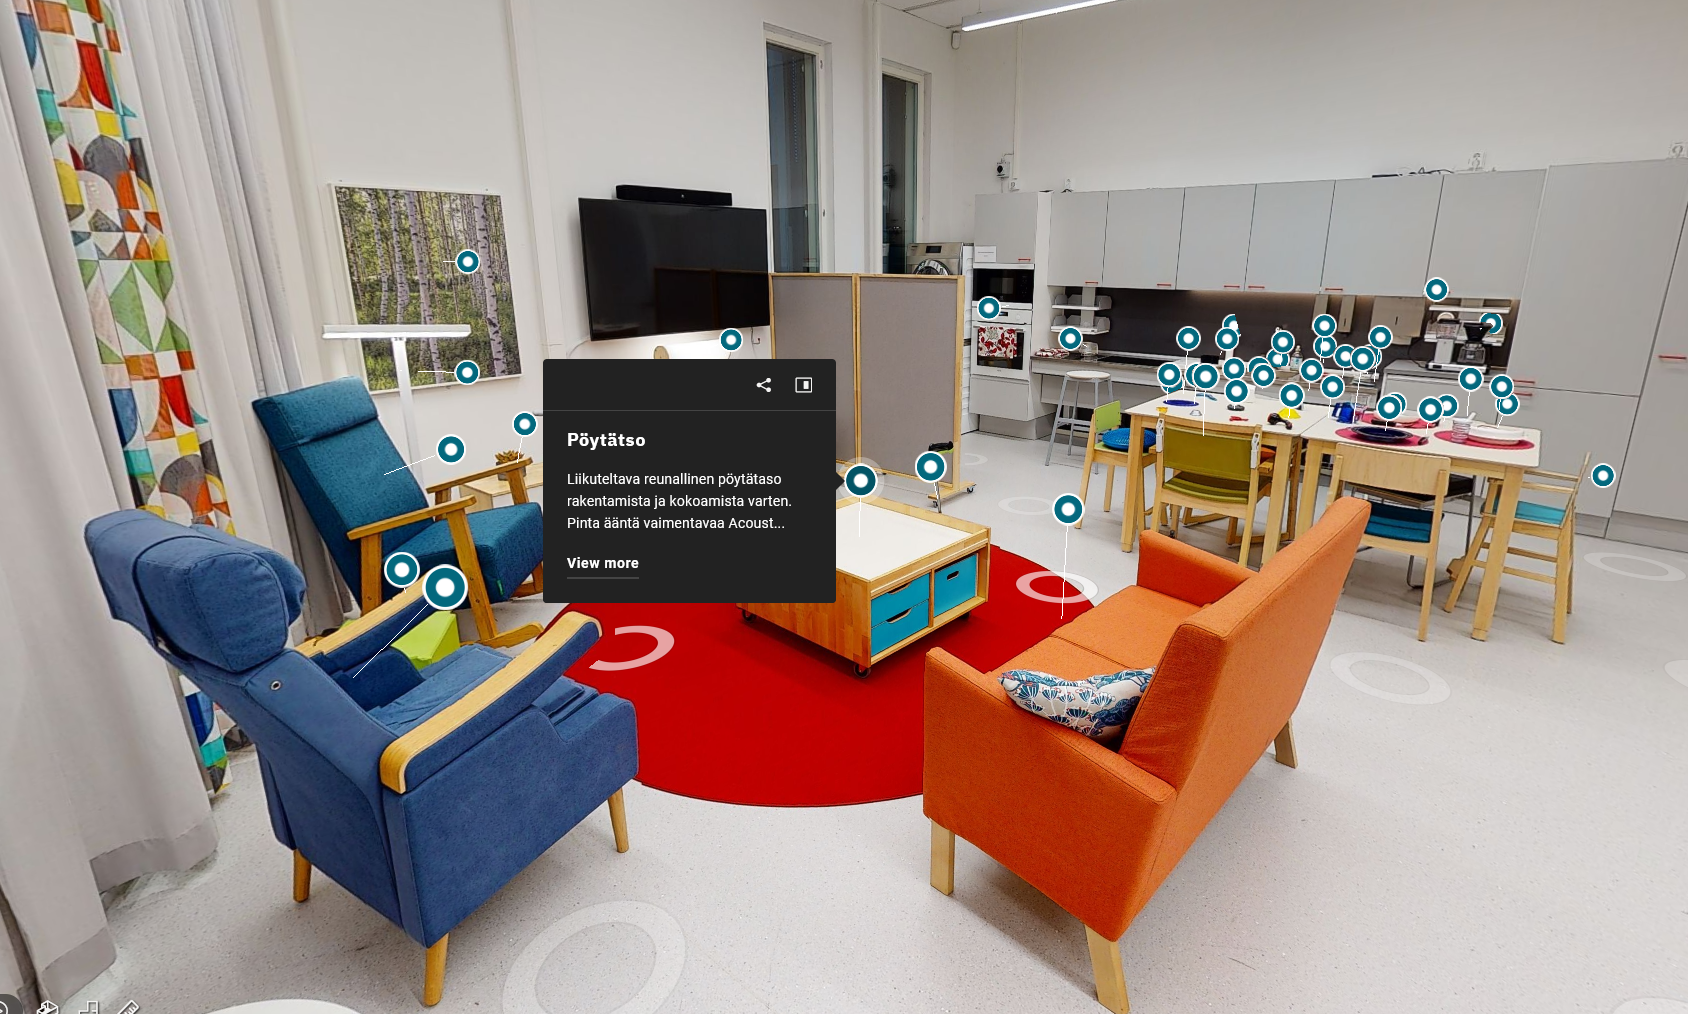 360 Matterport image of Kotikulma. The blue rings gave more information about objects and furniture.